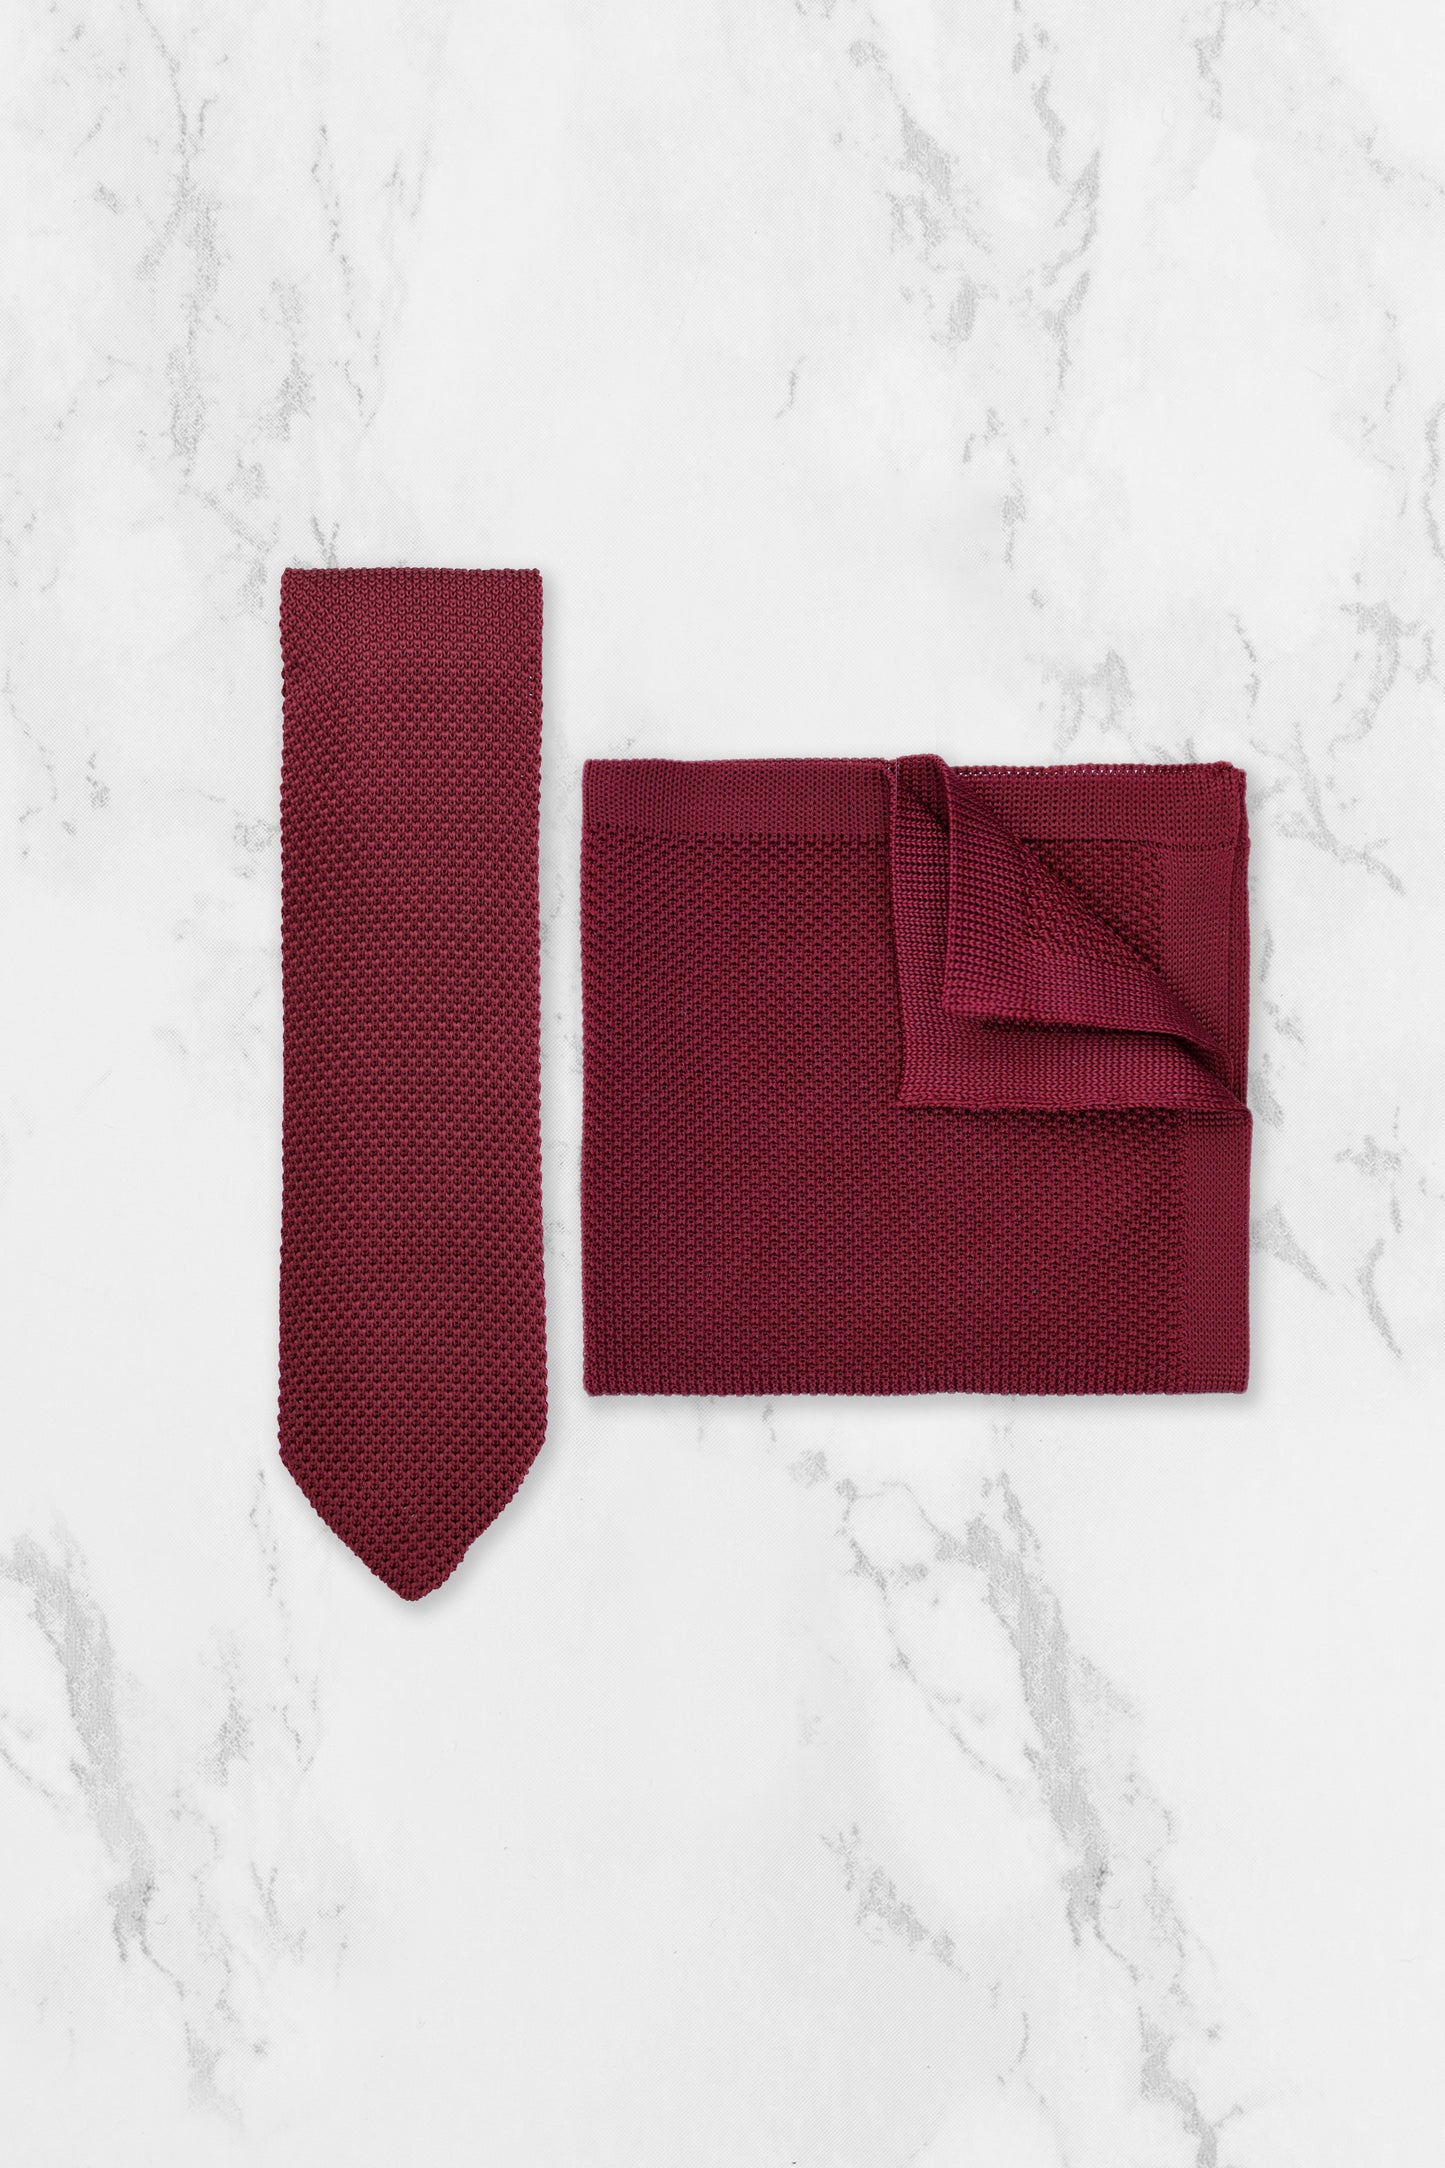 100% Polyester Knitted Bow Tie - Burgundy Red